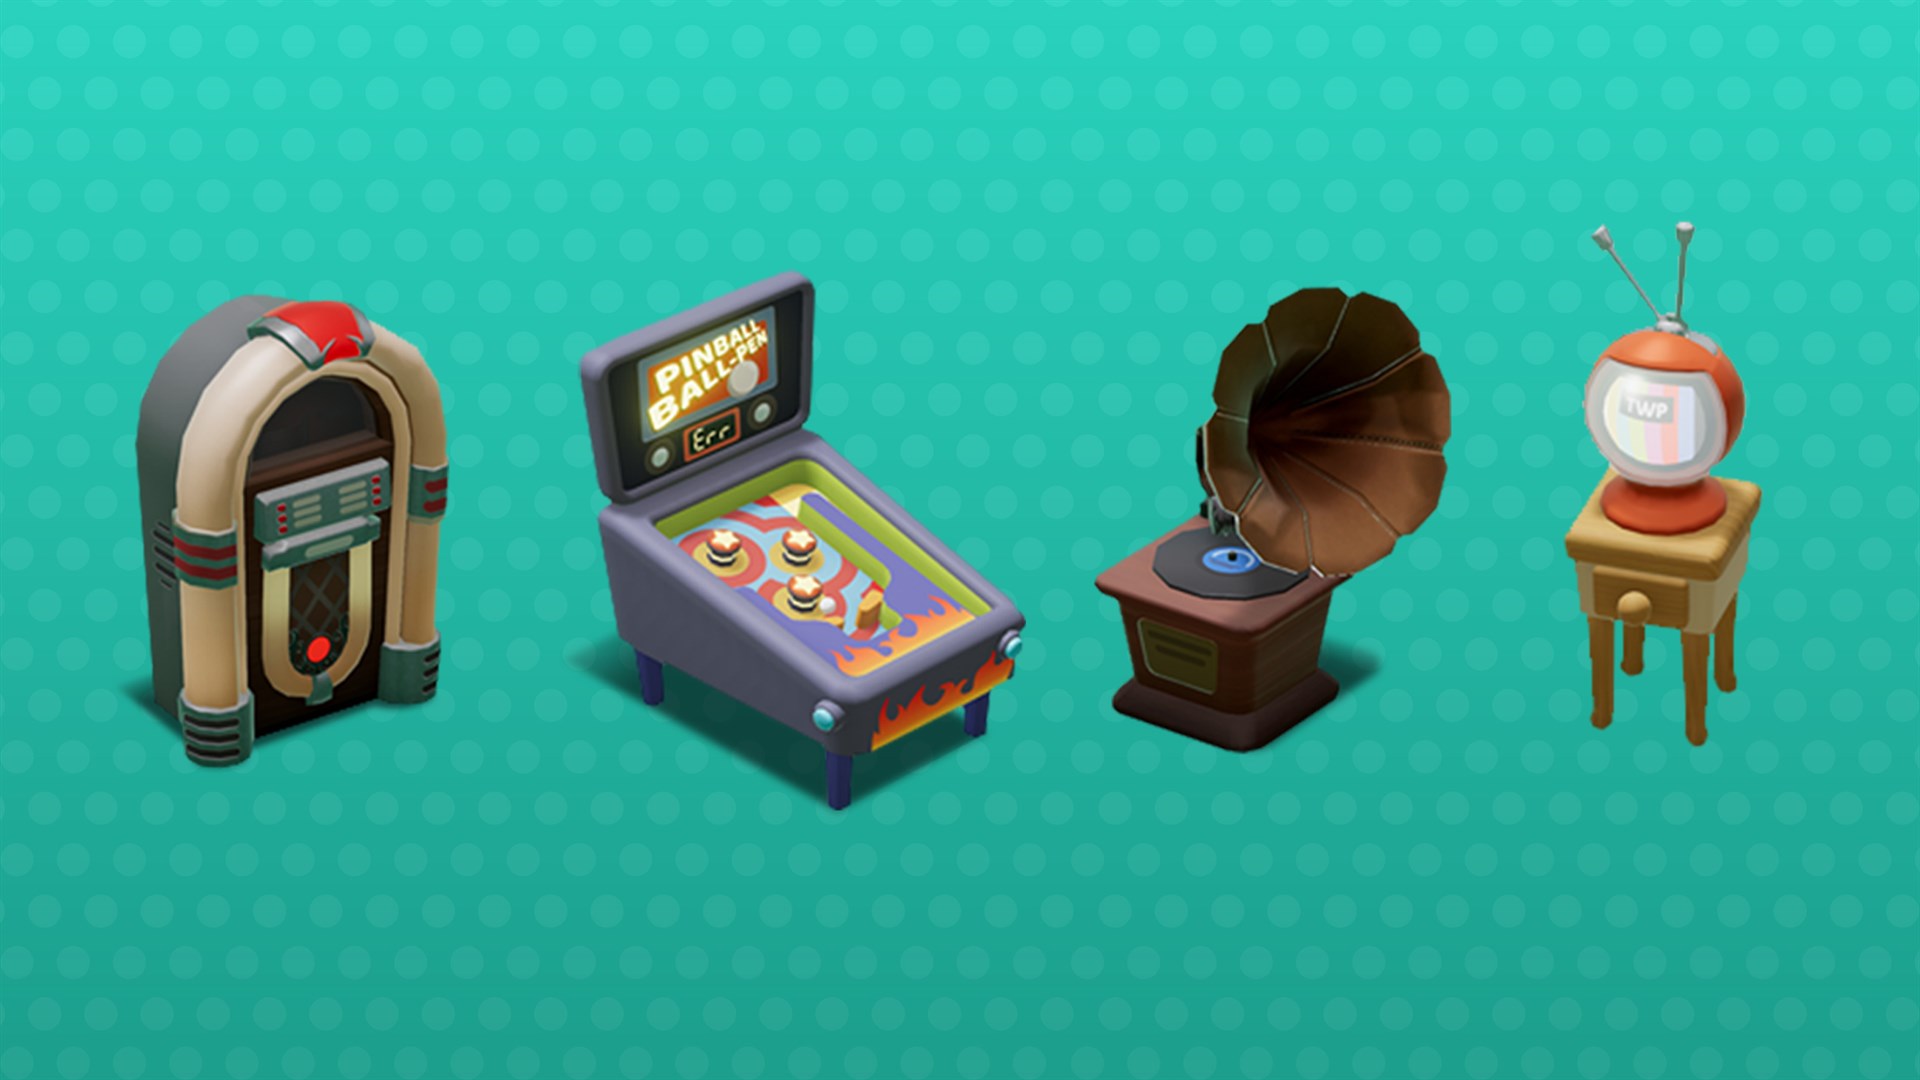 Two Point Hospital: Retro Items Pack